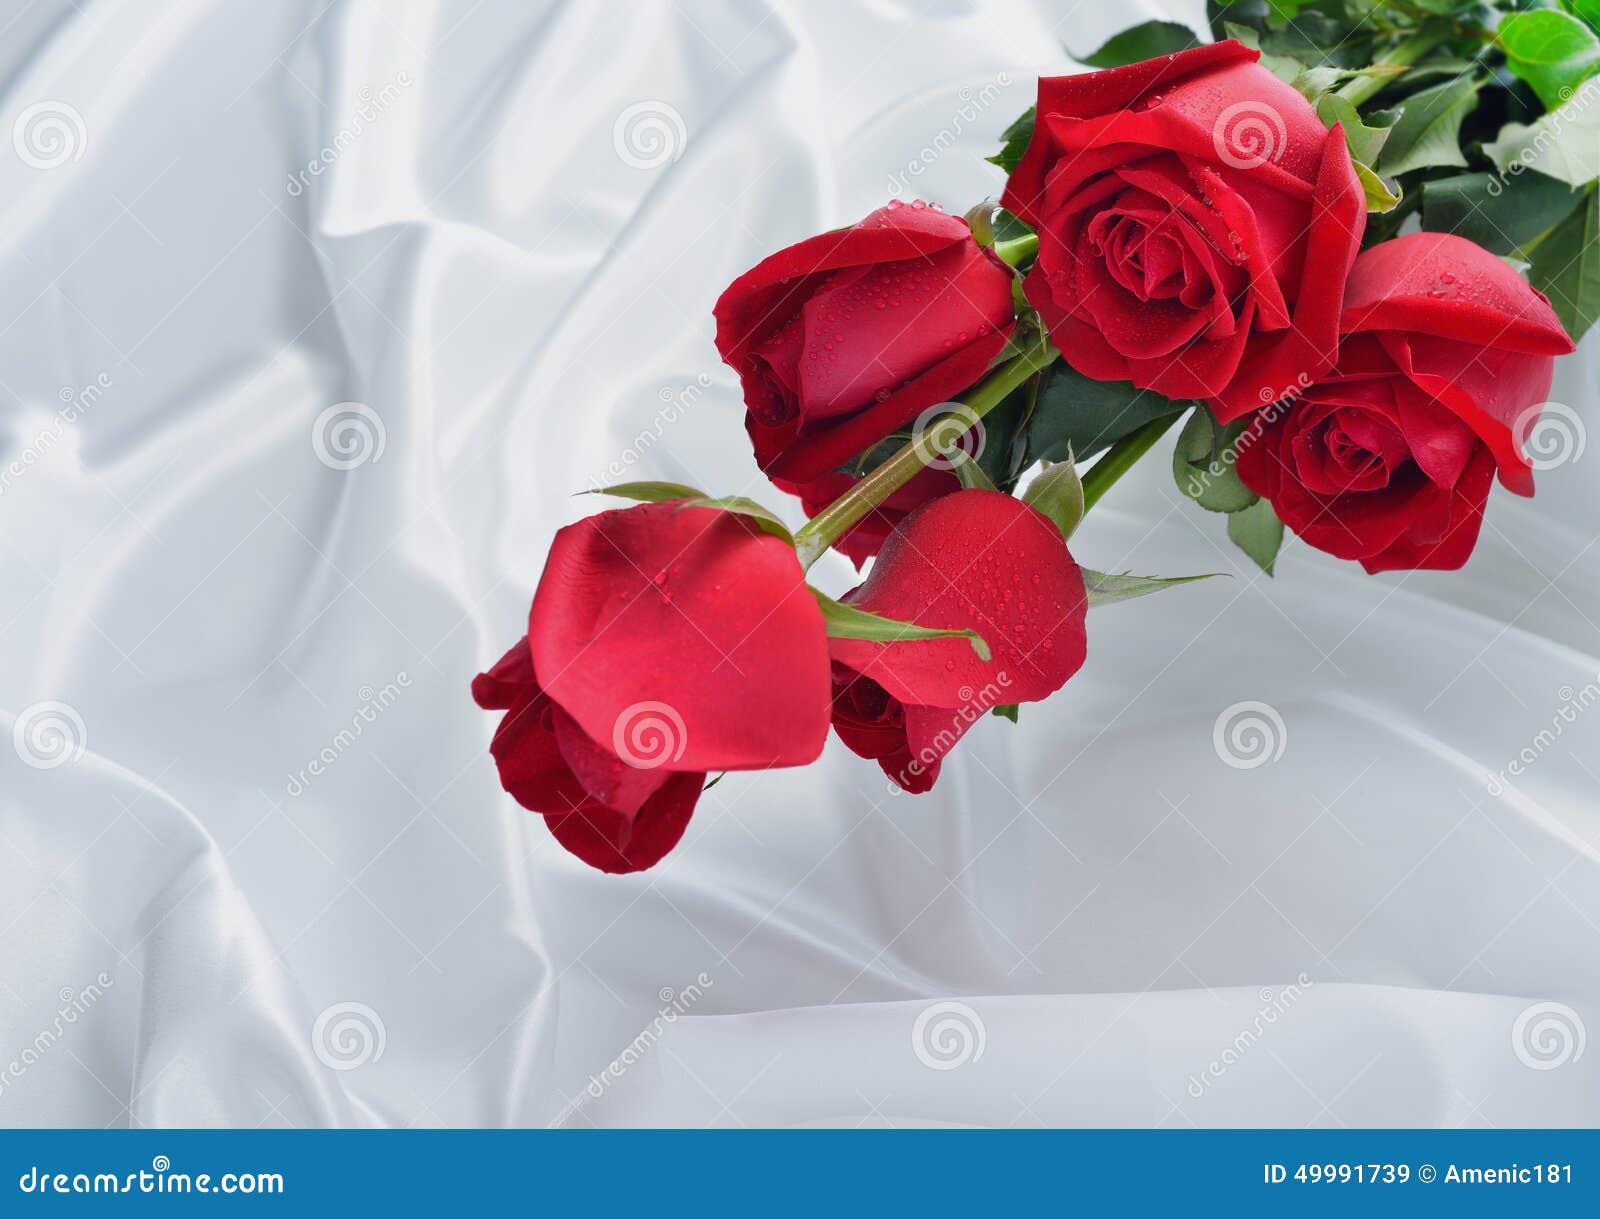 Red rose stock image. Image of white, gift, rose, plant - 49991739